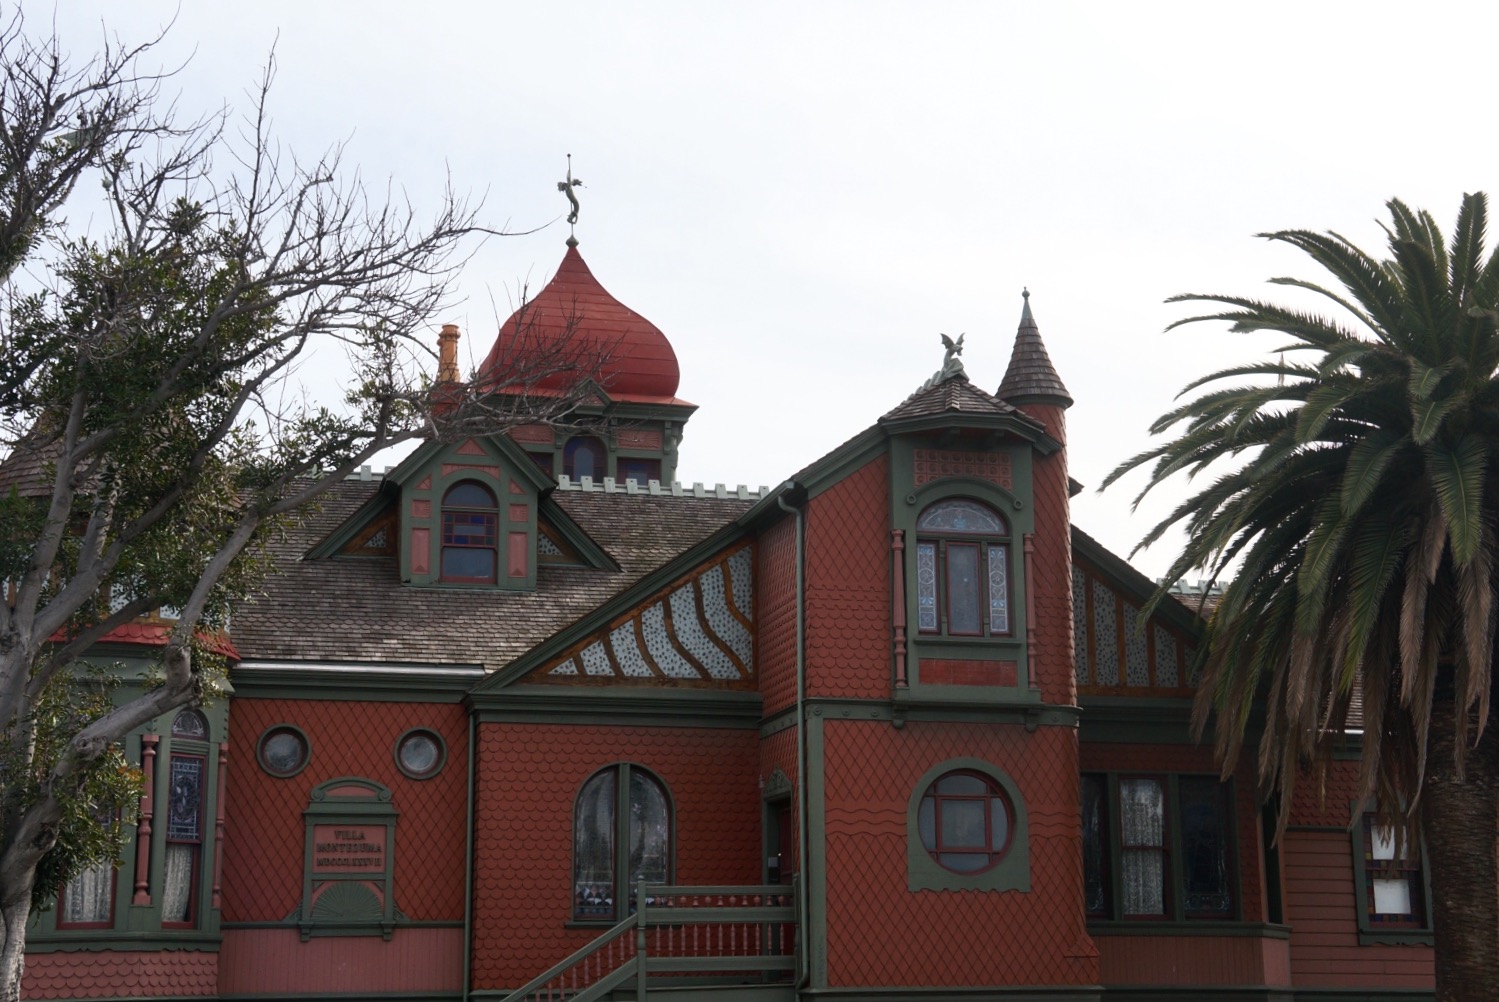 Victorian San Diego’s “Palace of the Arts.”